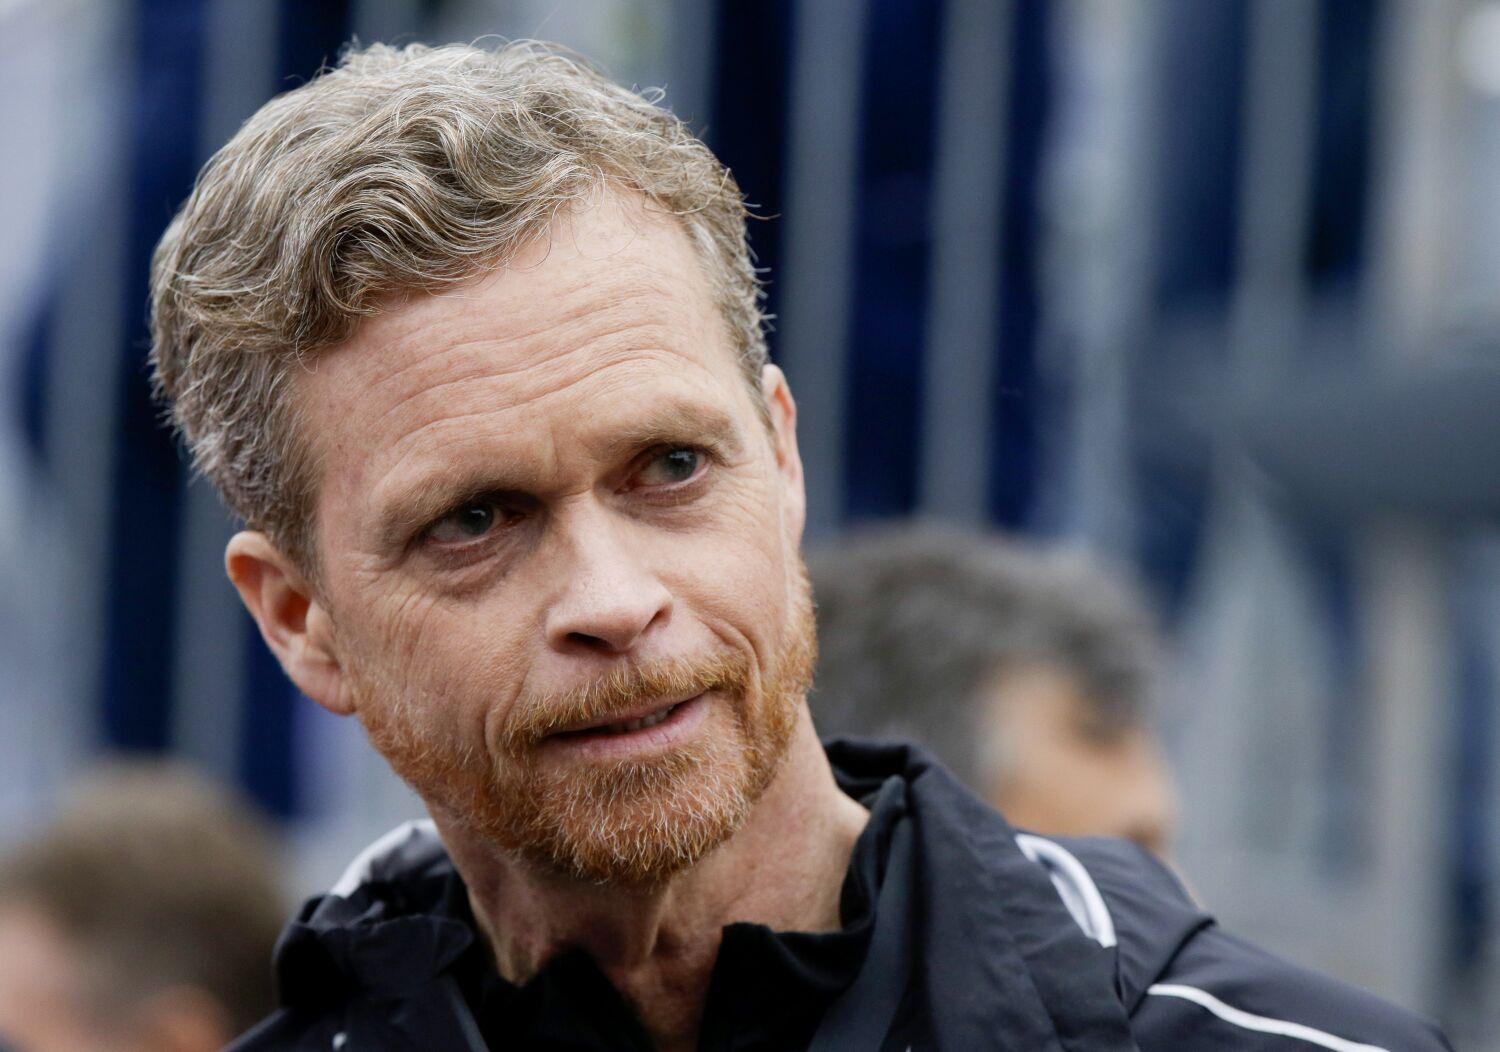 Disney names former Nike CEO Mark Parker as board chairman, replacing Susan Arnold